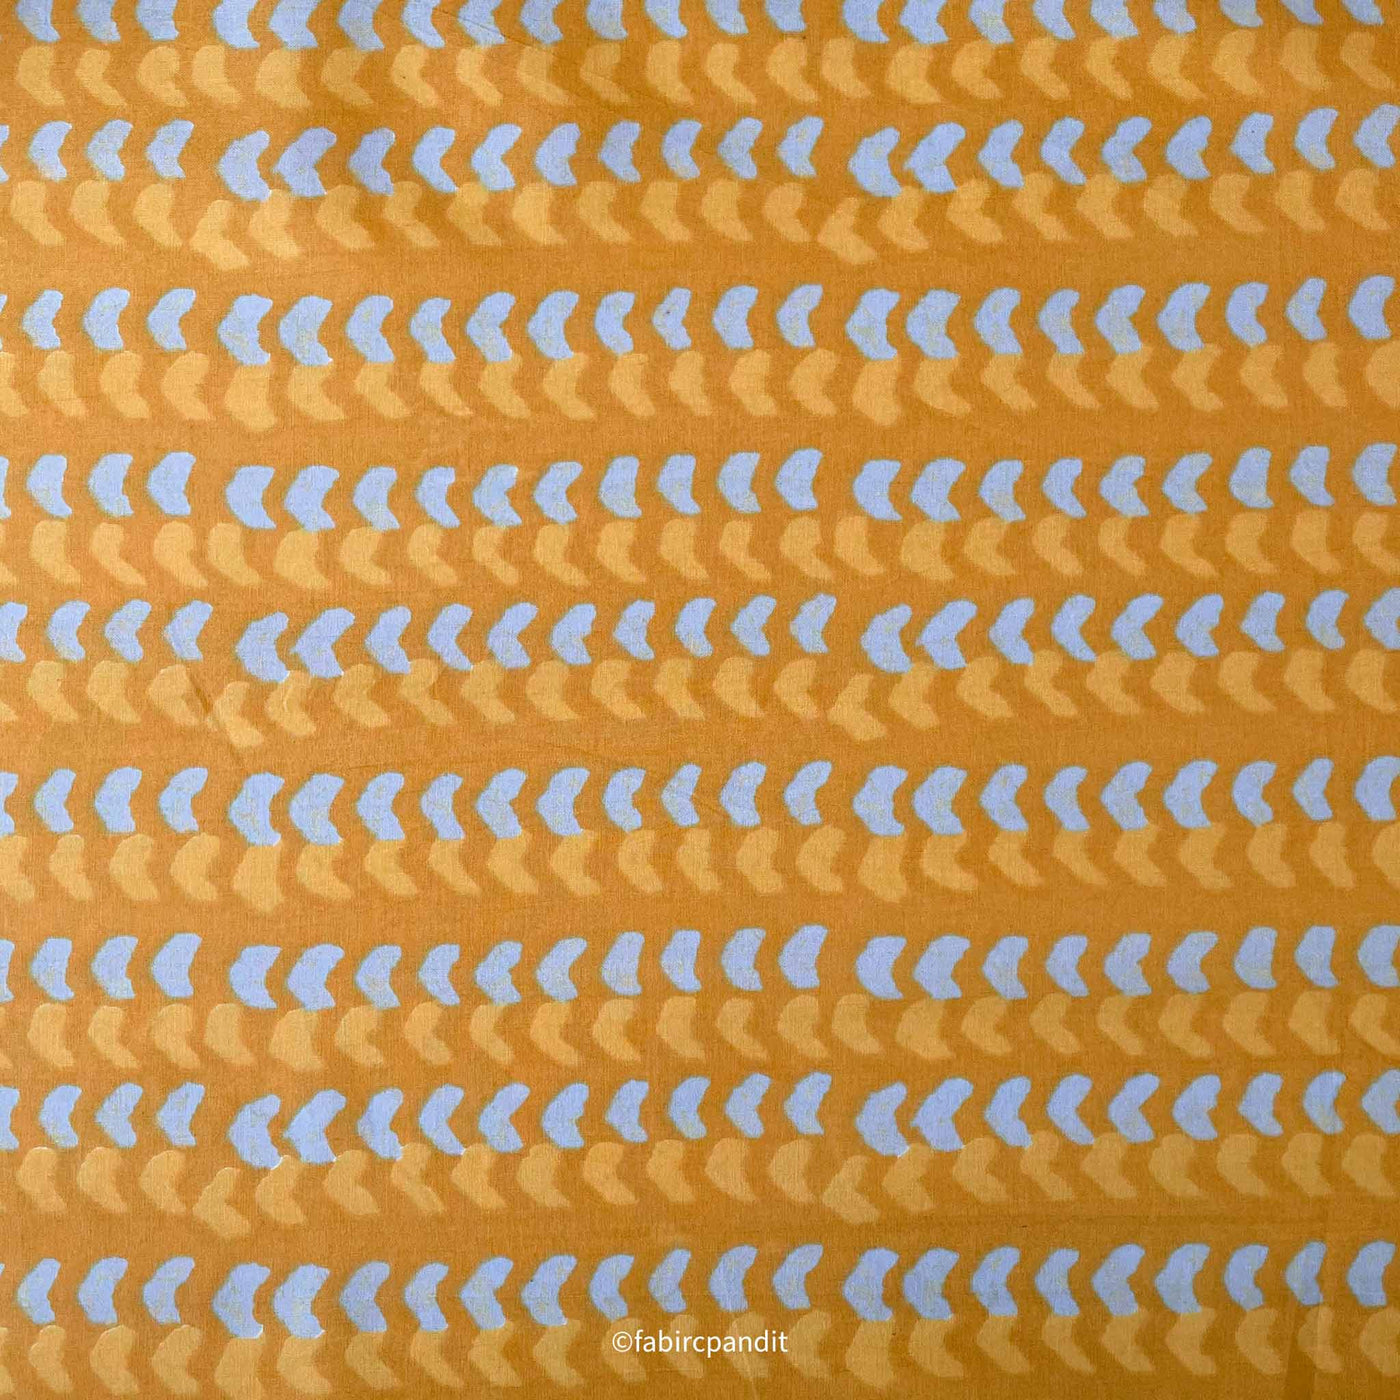 Fabric Pandit Fabric Dusty Yellow and Grey Geometric Stripes Hand Block Printed Pure Cotton Fabric (Width 43 inches)